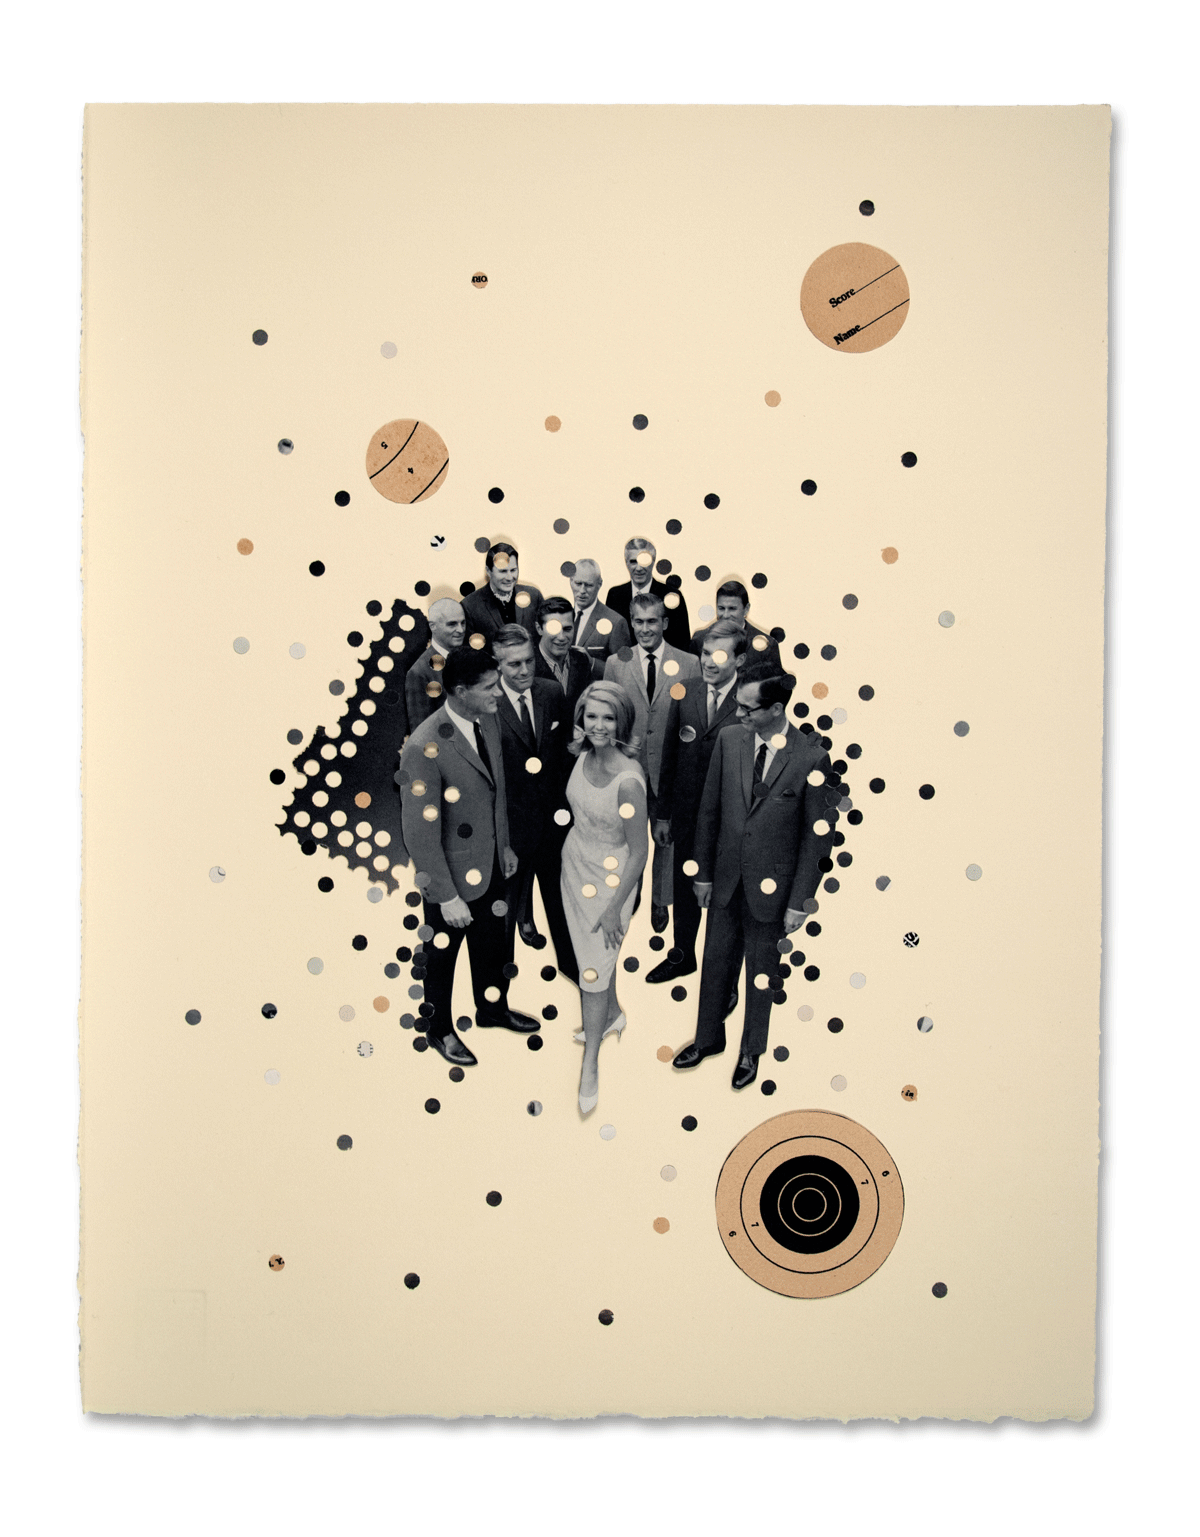   Eleven (Open Chats),&nbsp; 2014  15"x20"  collage on paper  Private Collection New York, NY 